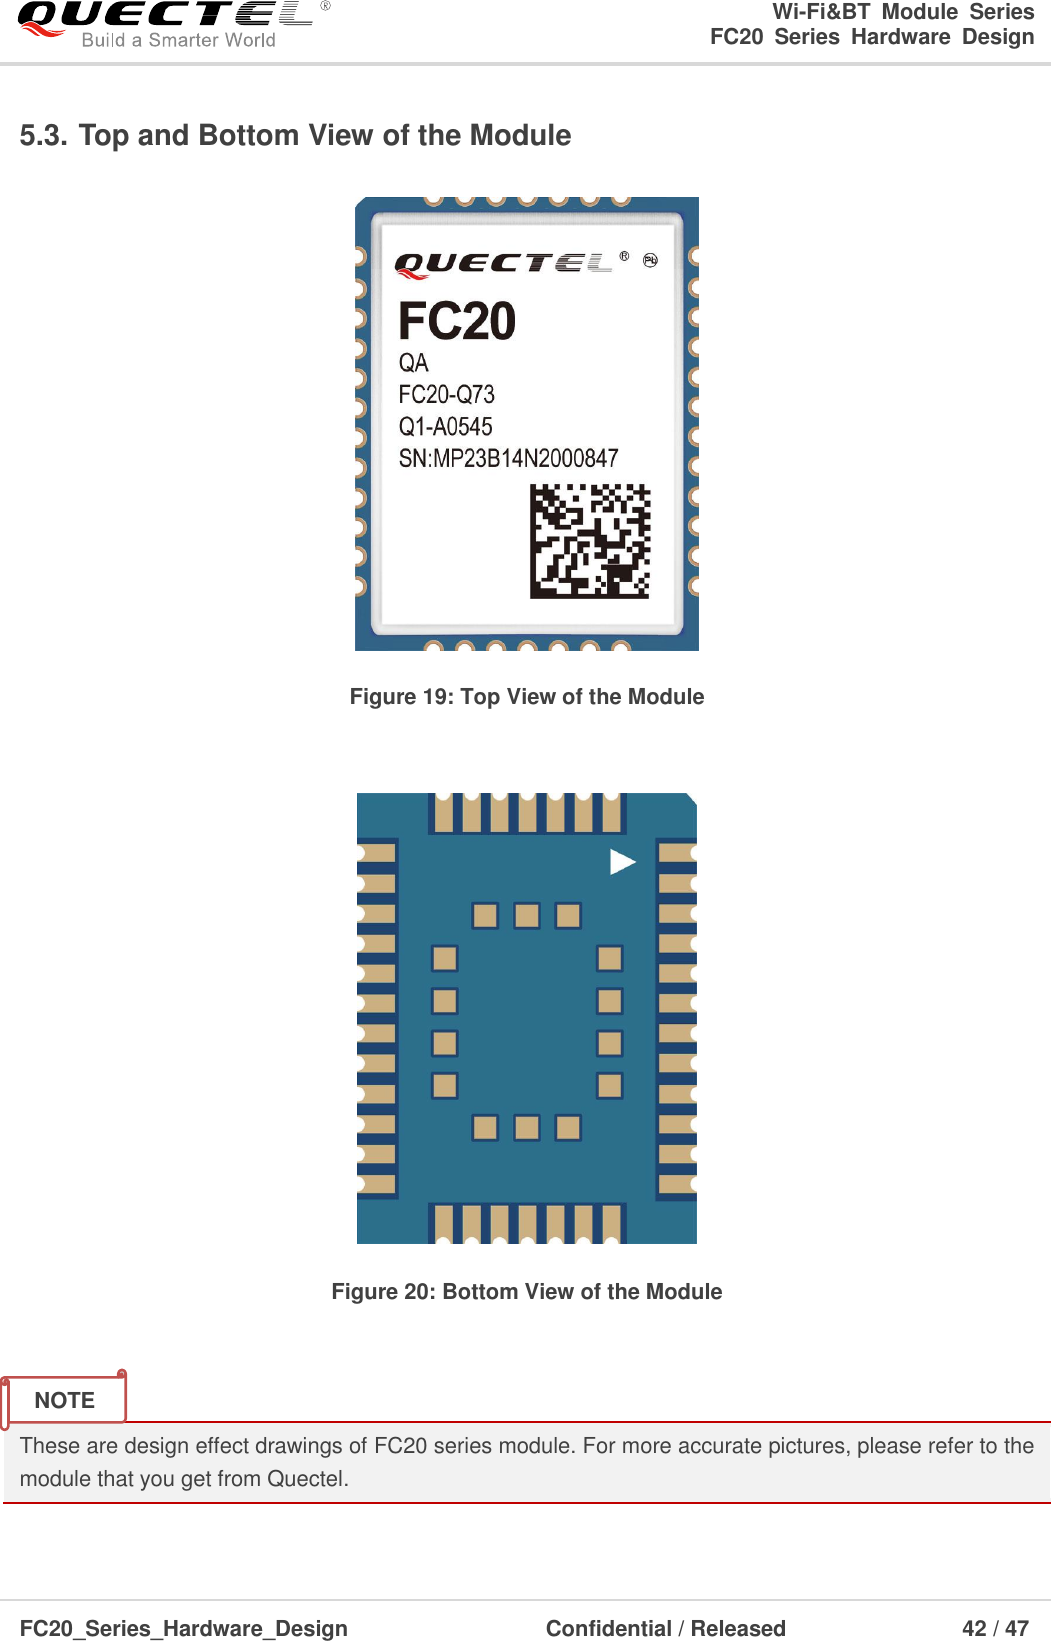                                                                        Wi-Fi&amp;BT  Module  Series                                                               FC20  Series  Hardware  Design  FC20_Series_Hardware_Design                                    Confidential / Released                    42 / 47    5.3. Top and Bottom View of the Module  Figure 19: Top View of the Module   Figure 20: Bottom View of the Module   These are design effect drawings of FC20 series module. For more accurate pictures, please refer to the module that you get from Quectel.    NOTE 